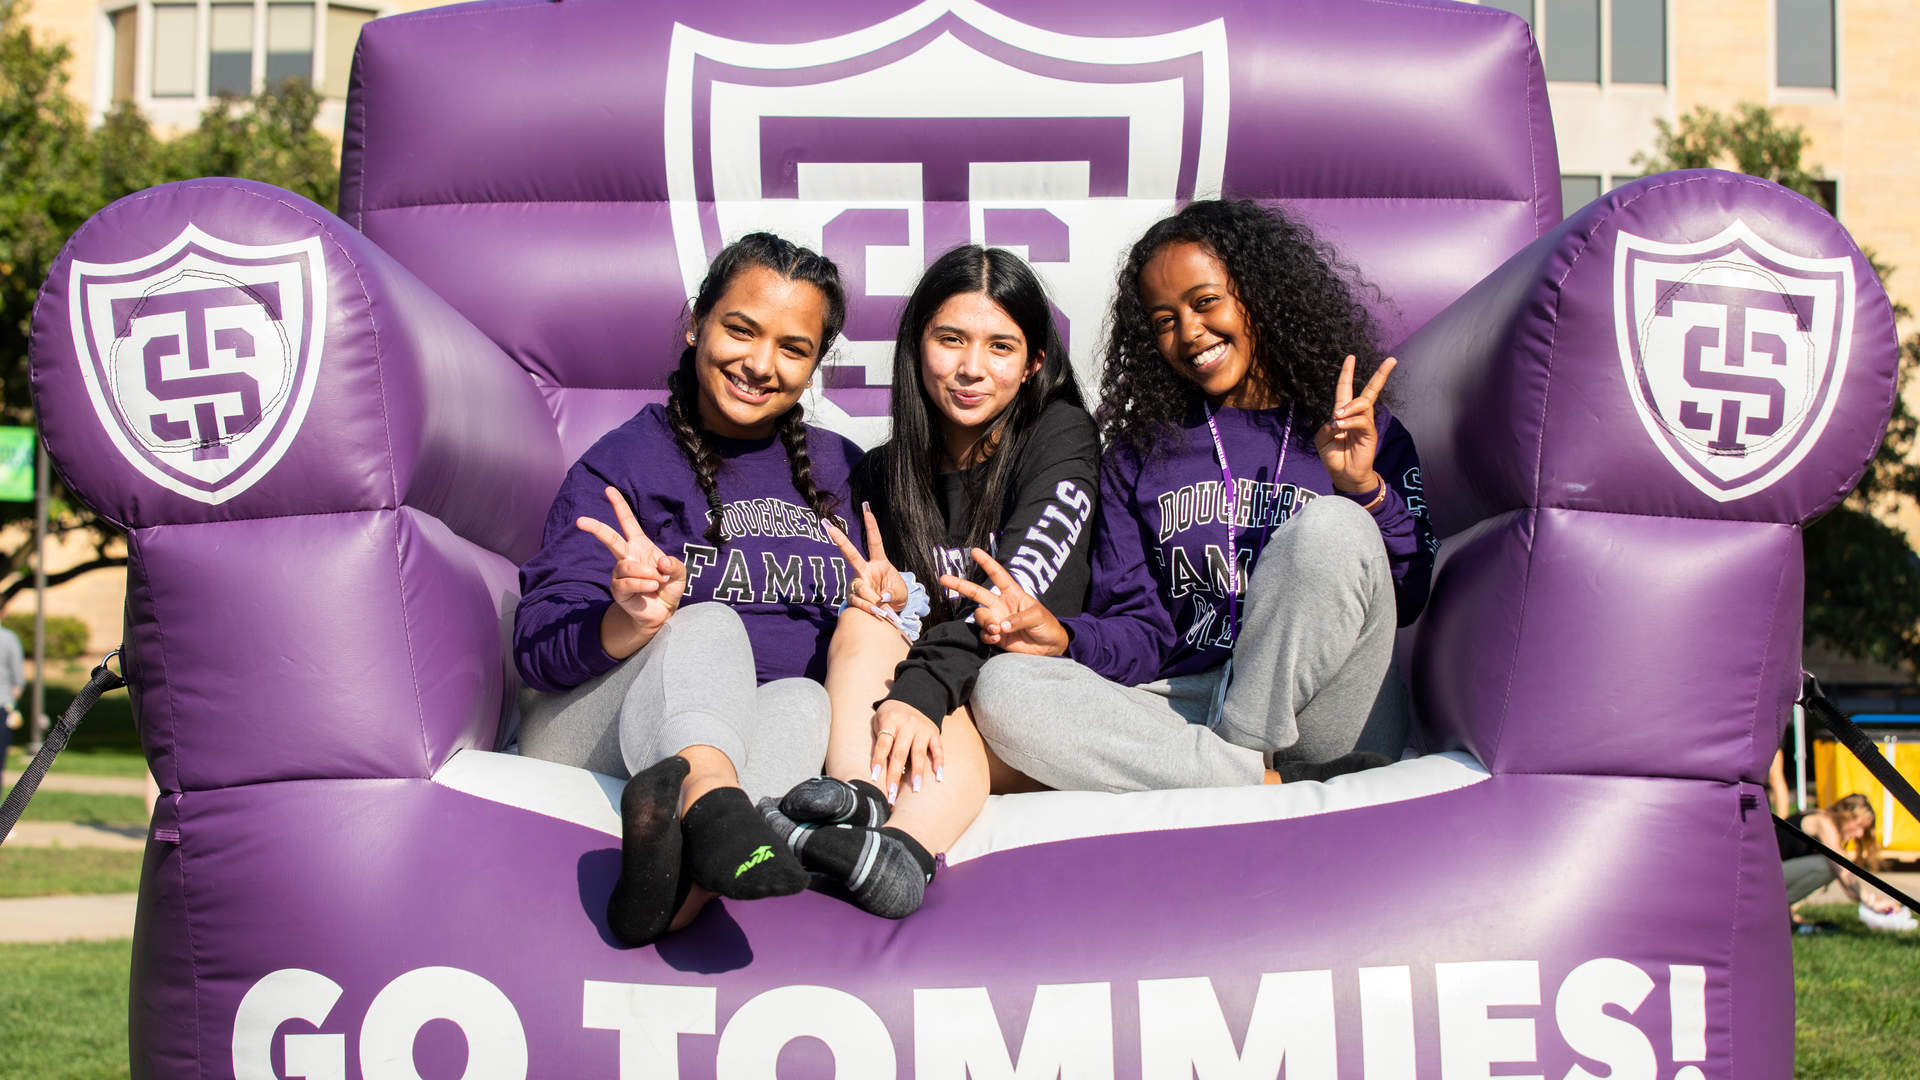 Three Tommies smiling while sitting on a giant purple inflatable chair.